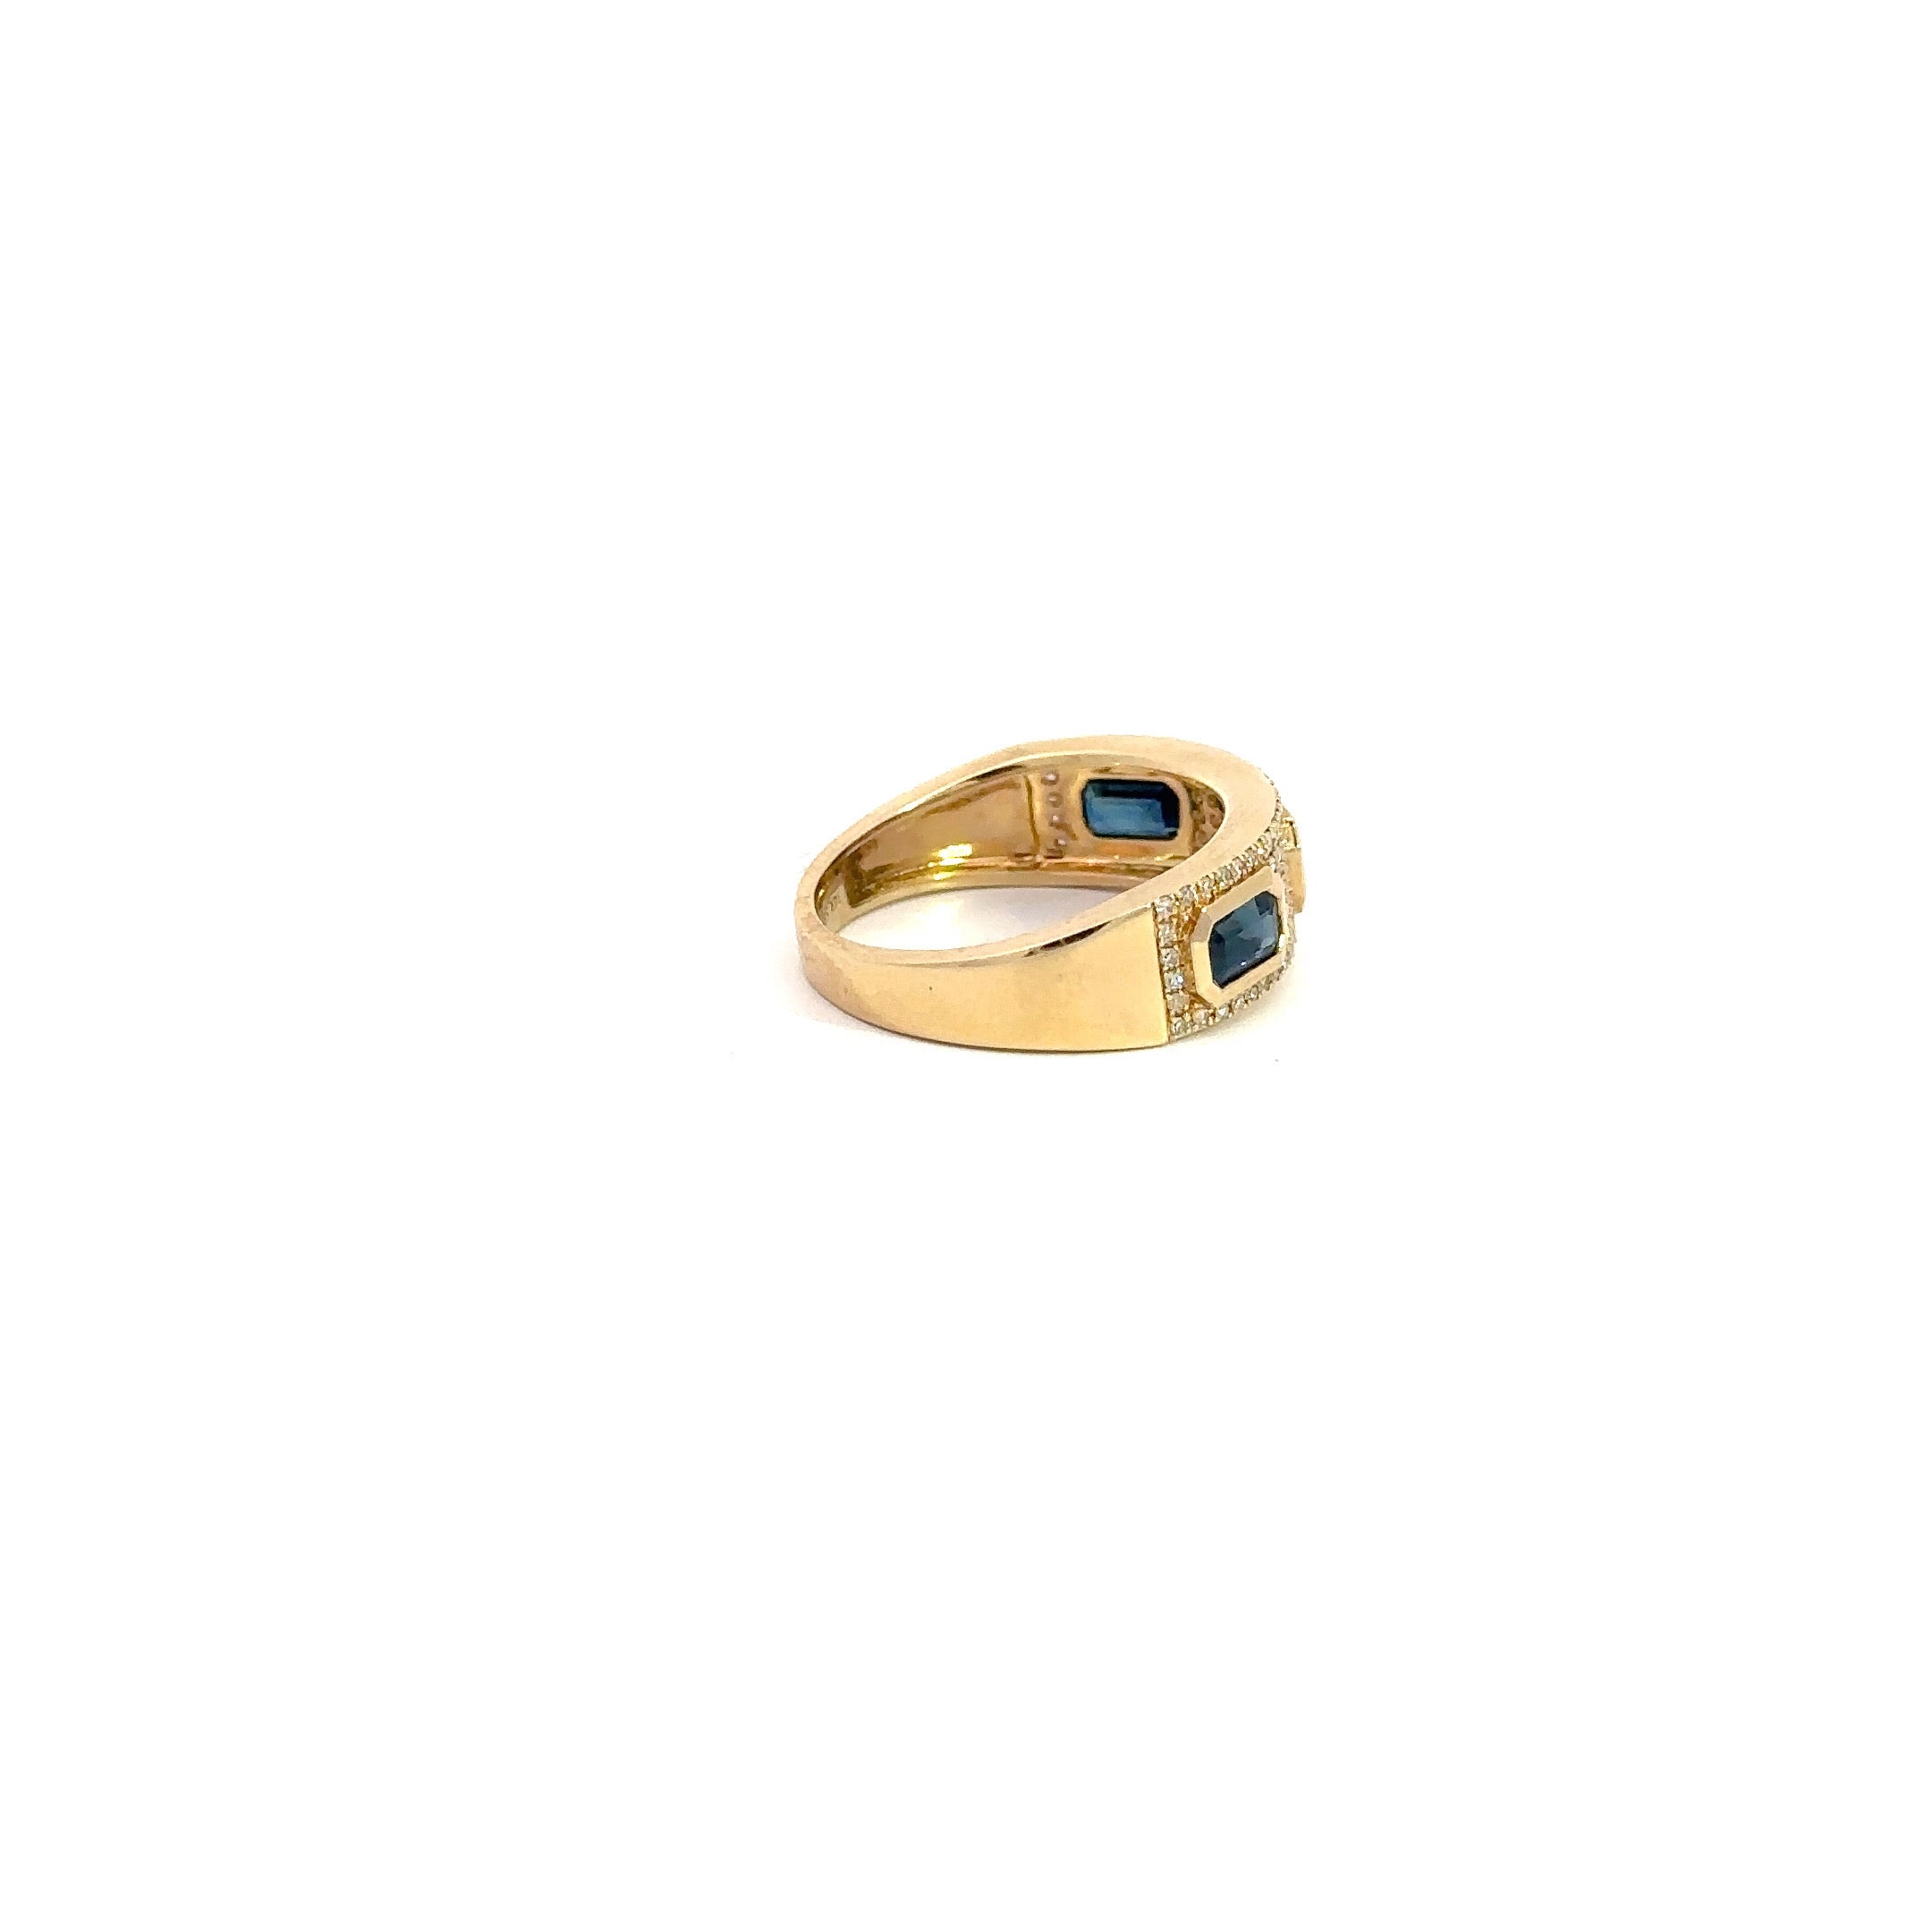 WD914 14kt gold, blue sapphire and diamond ring